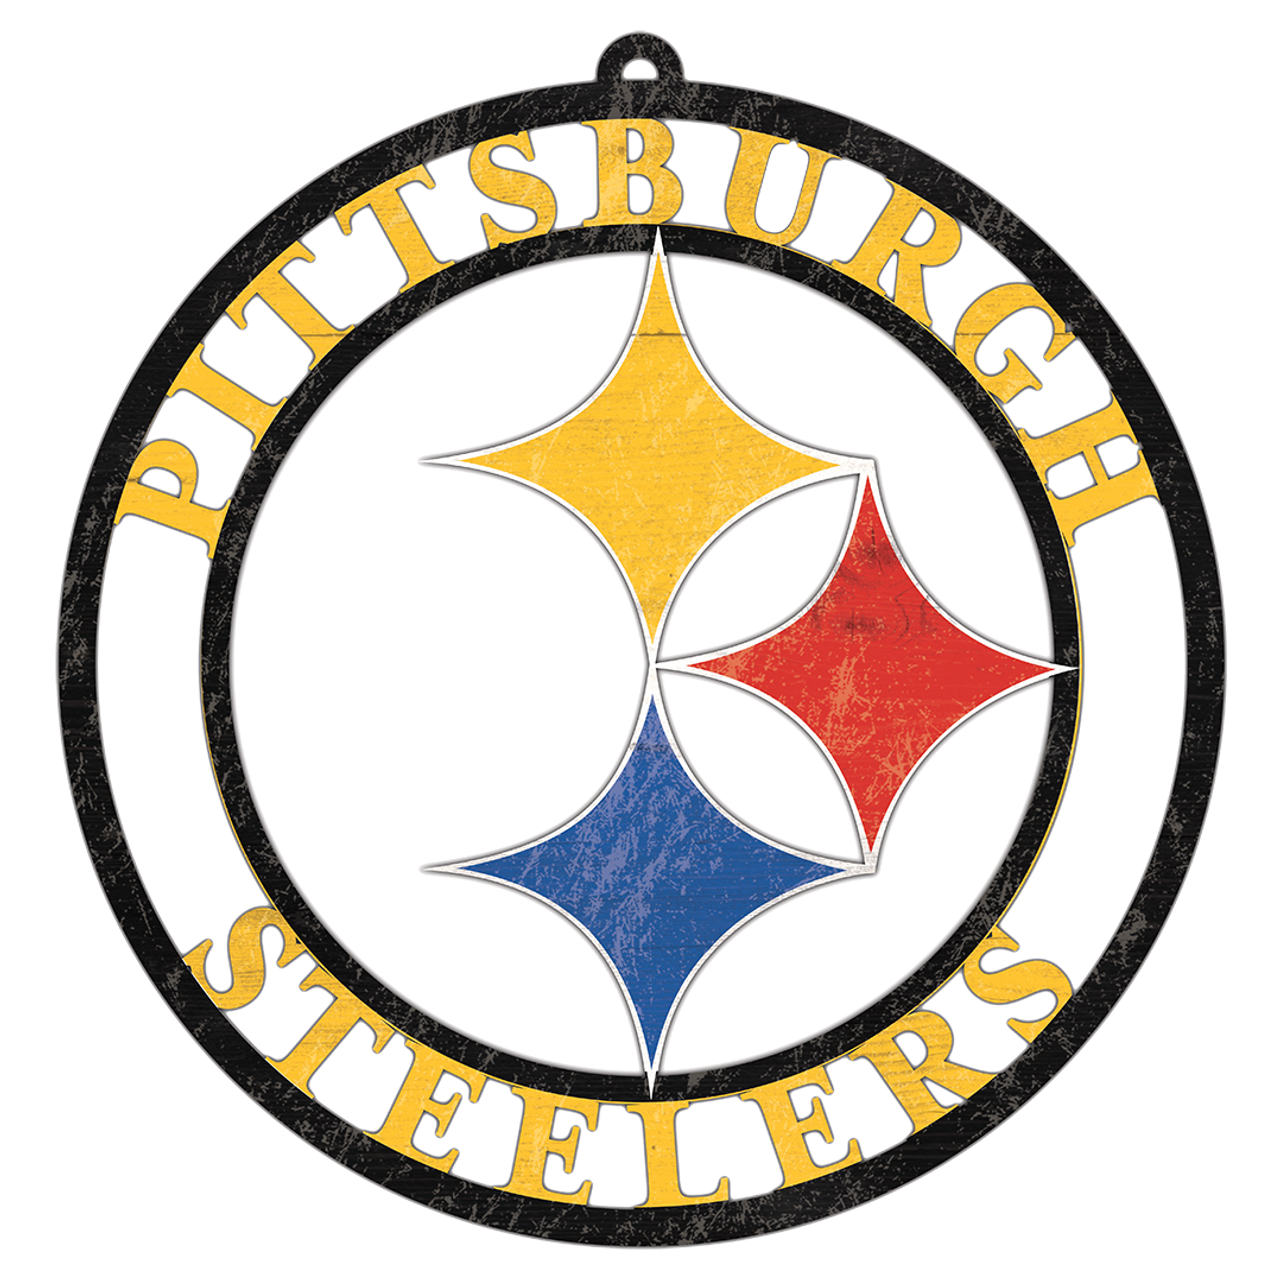 Pittsburgh Steelers Logo Clip Art drawing free image download Clip